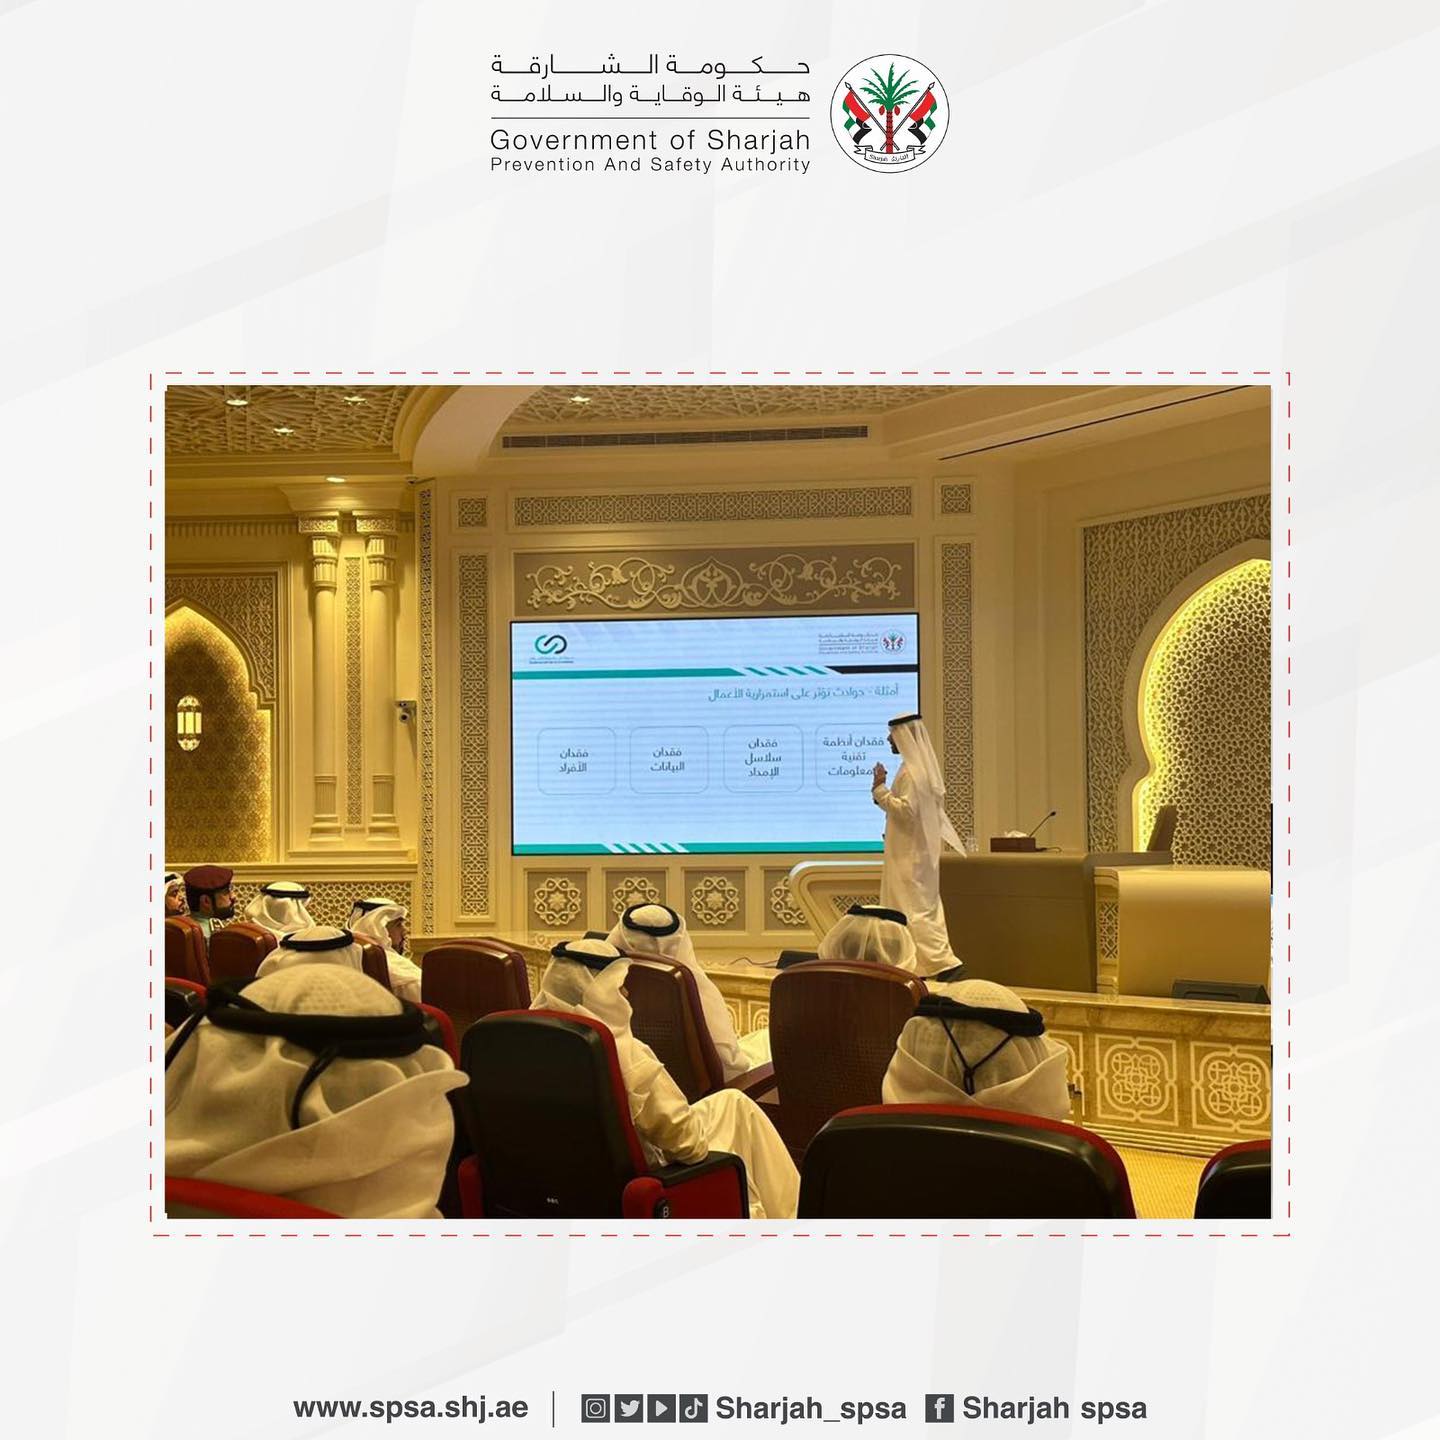 Business Continuity System Application Workshop